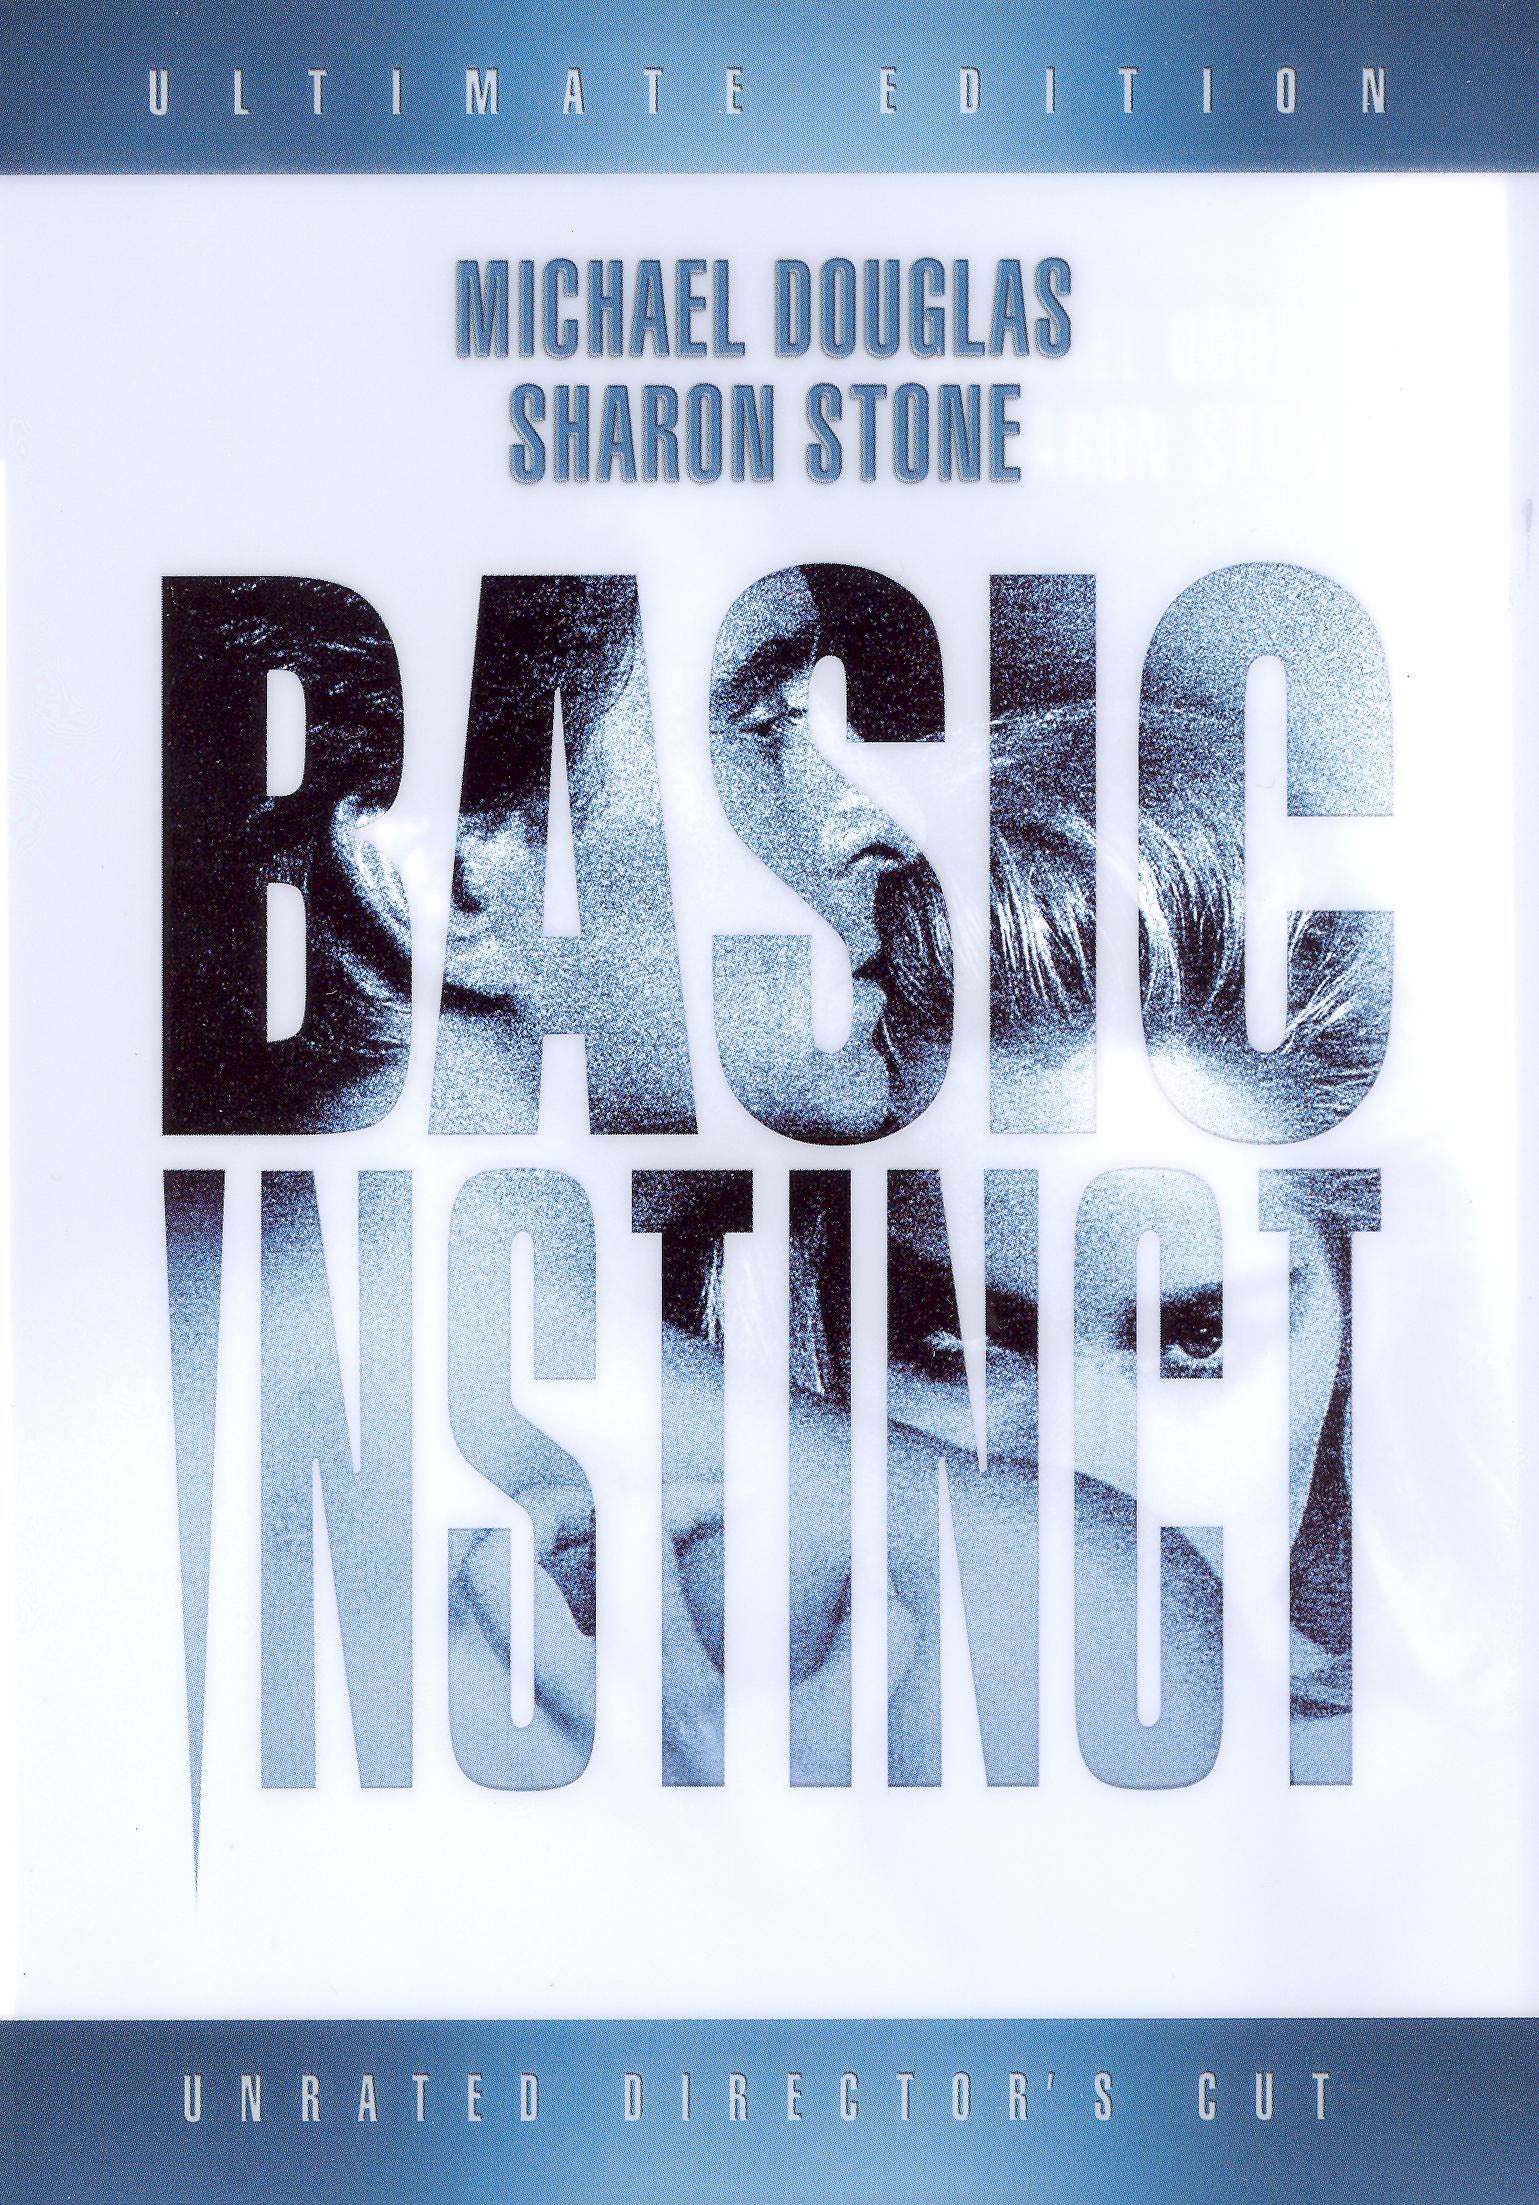 Basic Instinct [Ultimate Edition - Unrated Director's Cut] cover art